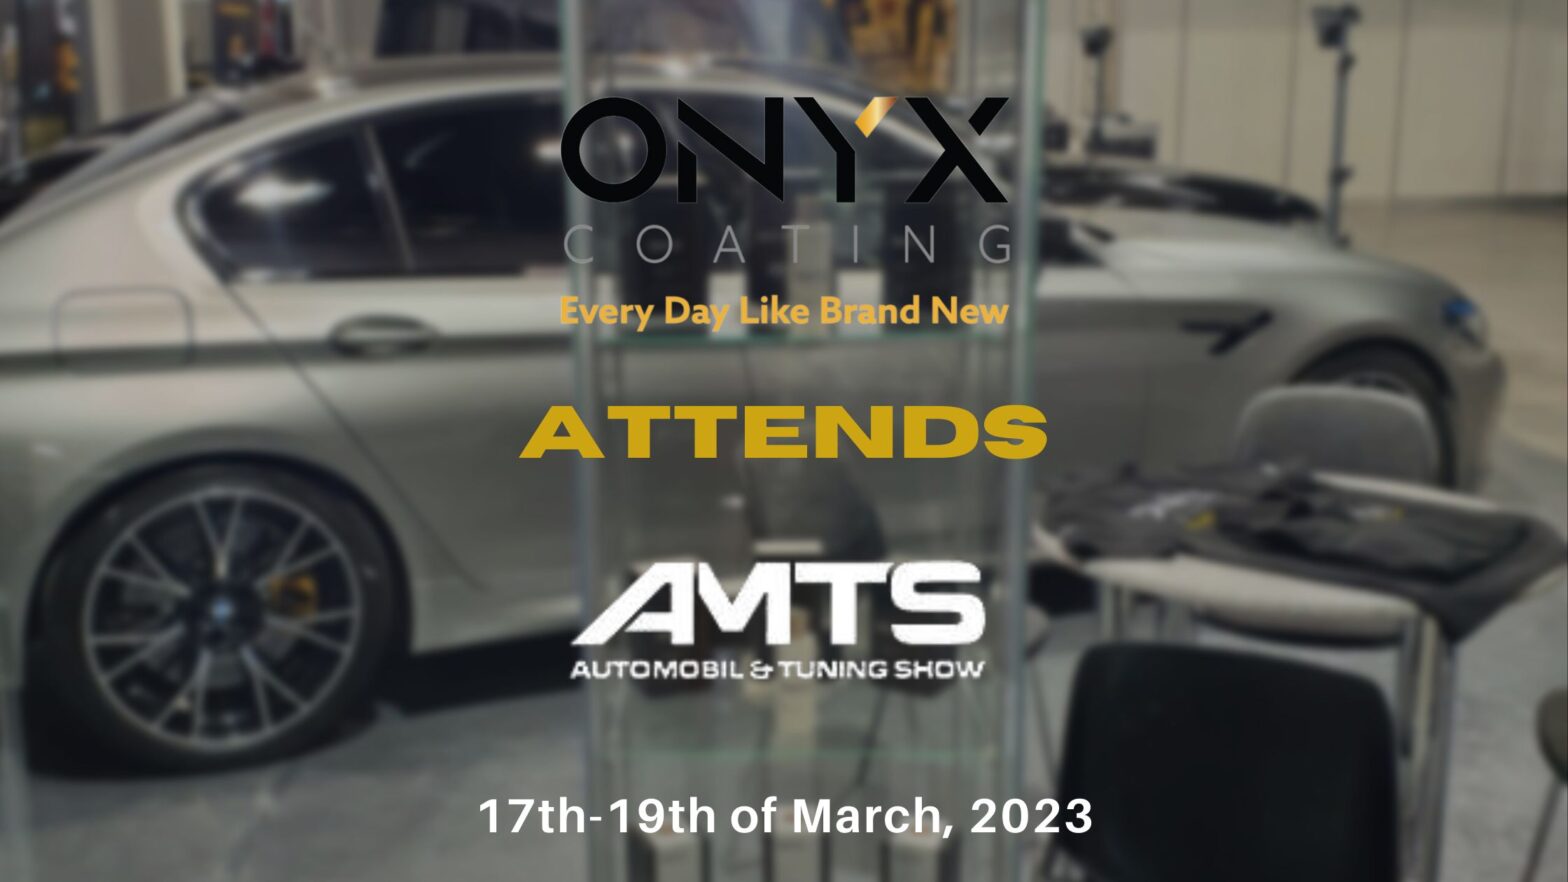 Onyx Coating Attending AMTS- A Must-See for Car Enthusiasts in Budapest